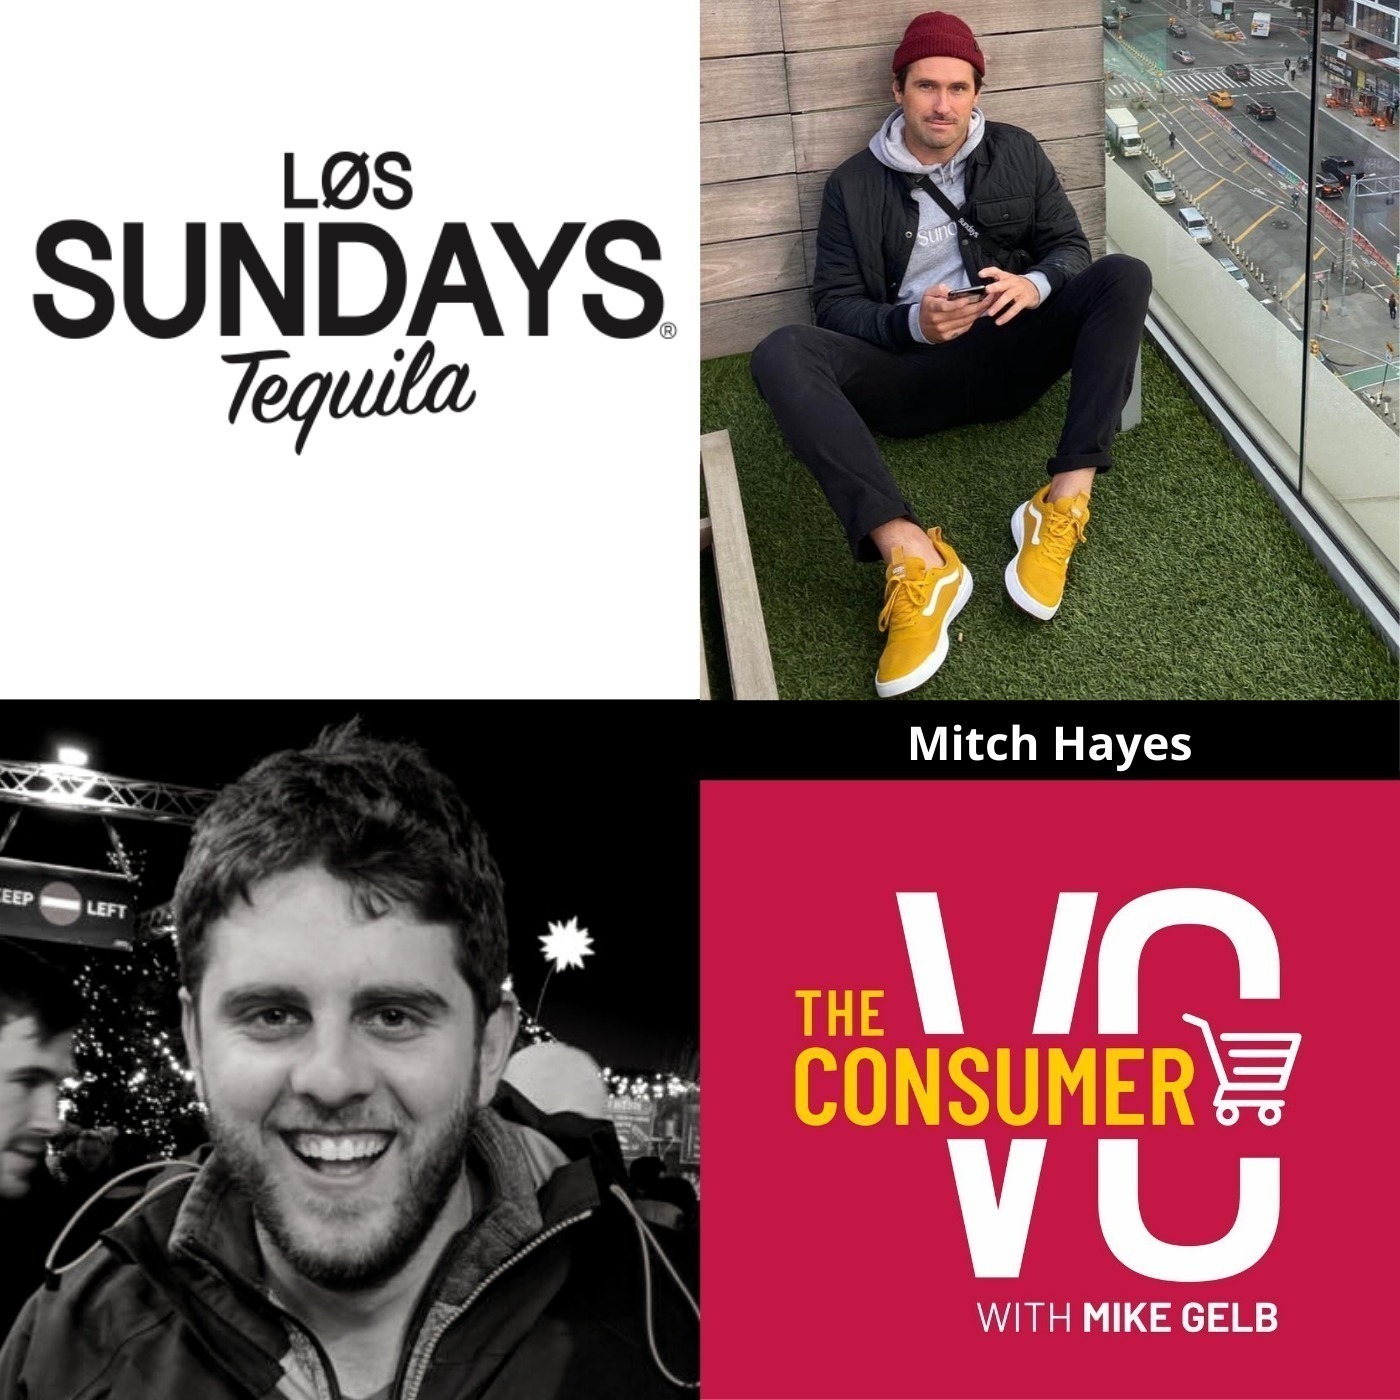 Mitch Hayes (Los Sundays) - Building a Tequila Brand for the Millennial, Focusing on Generating Demand, and a Taste of the Beverage Industry